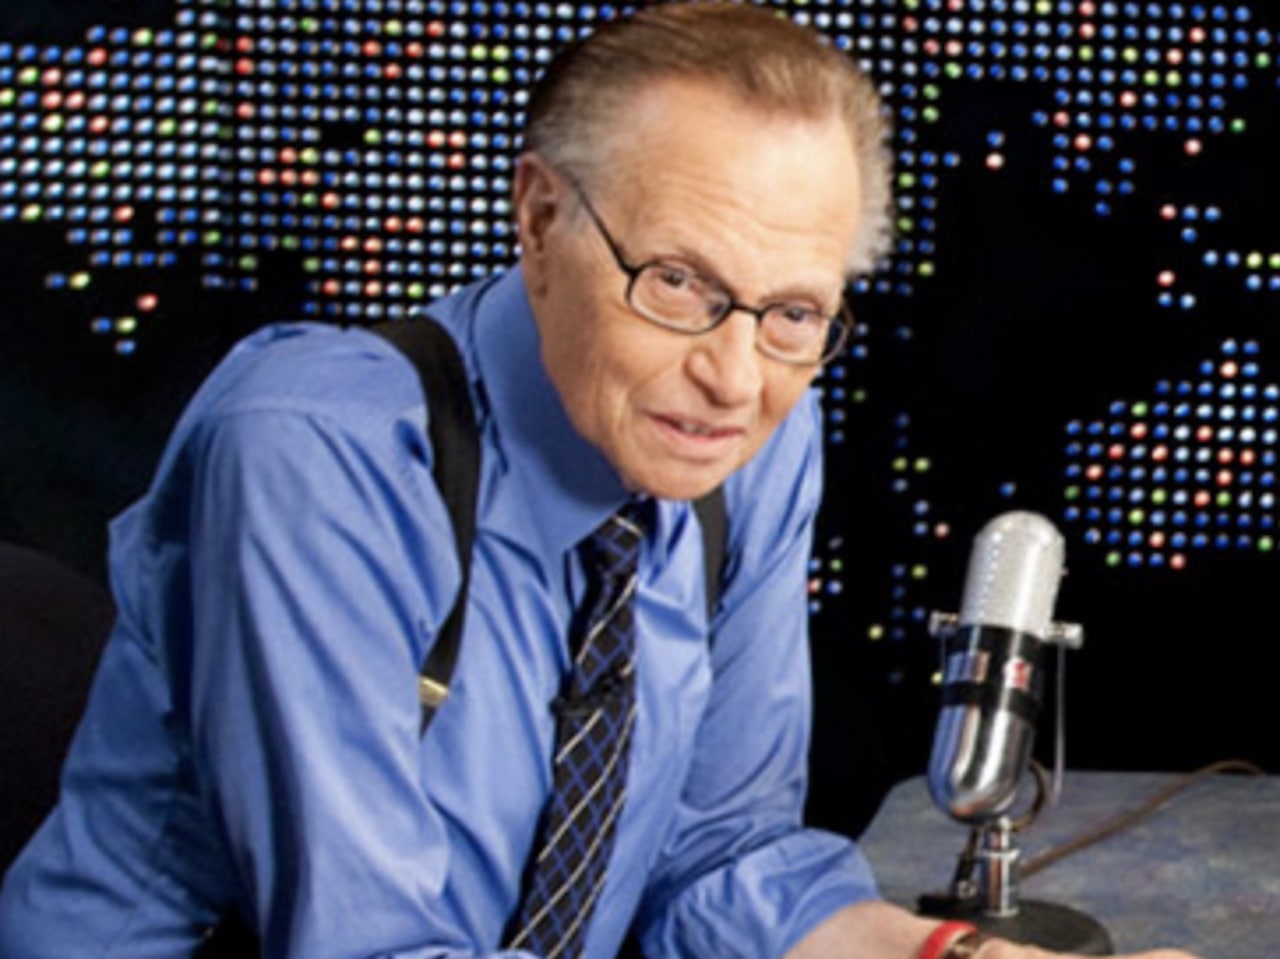 Larry King, Broadcasting Giant For Half-Century, Dies At 87